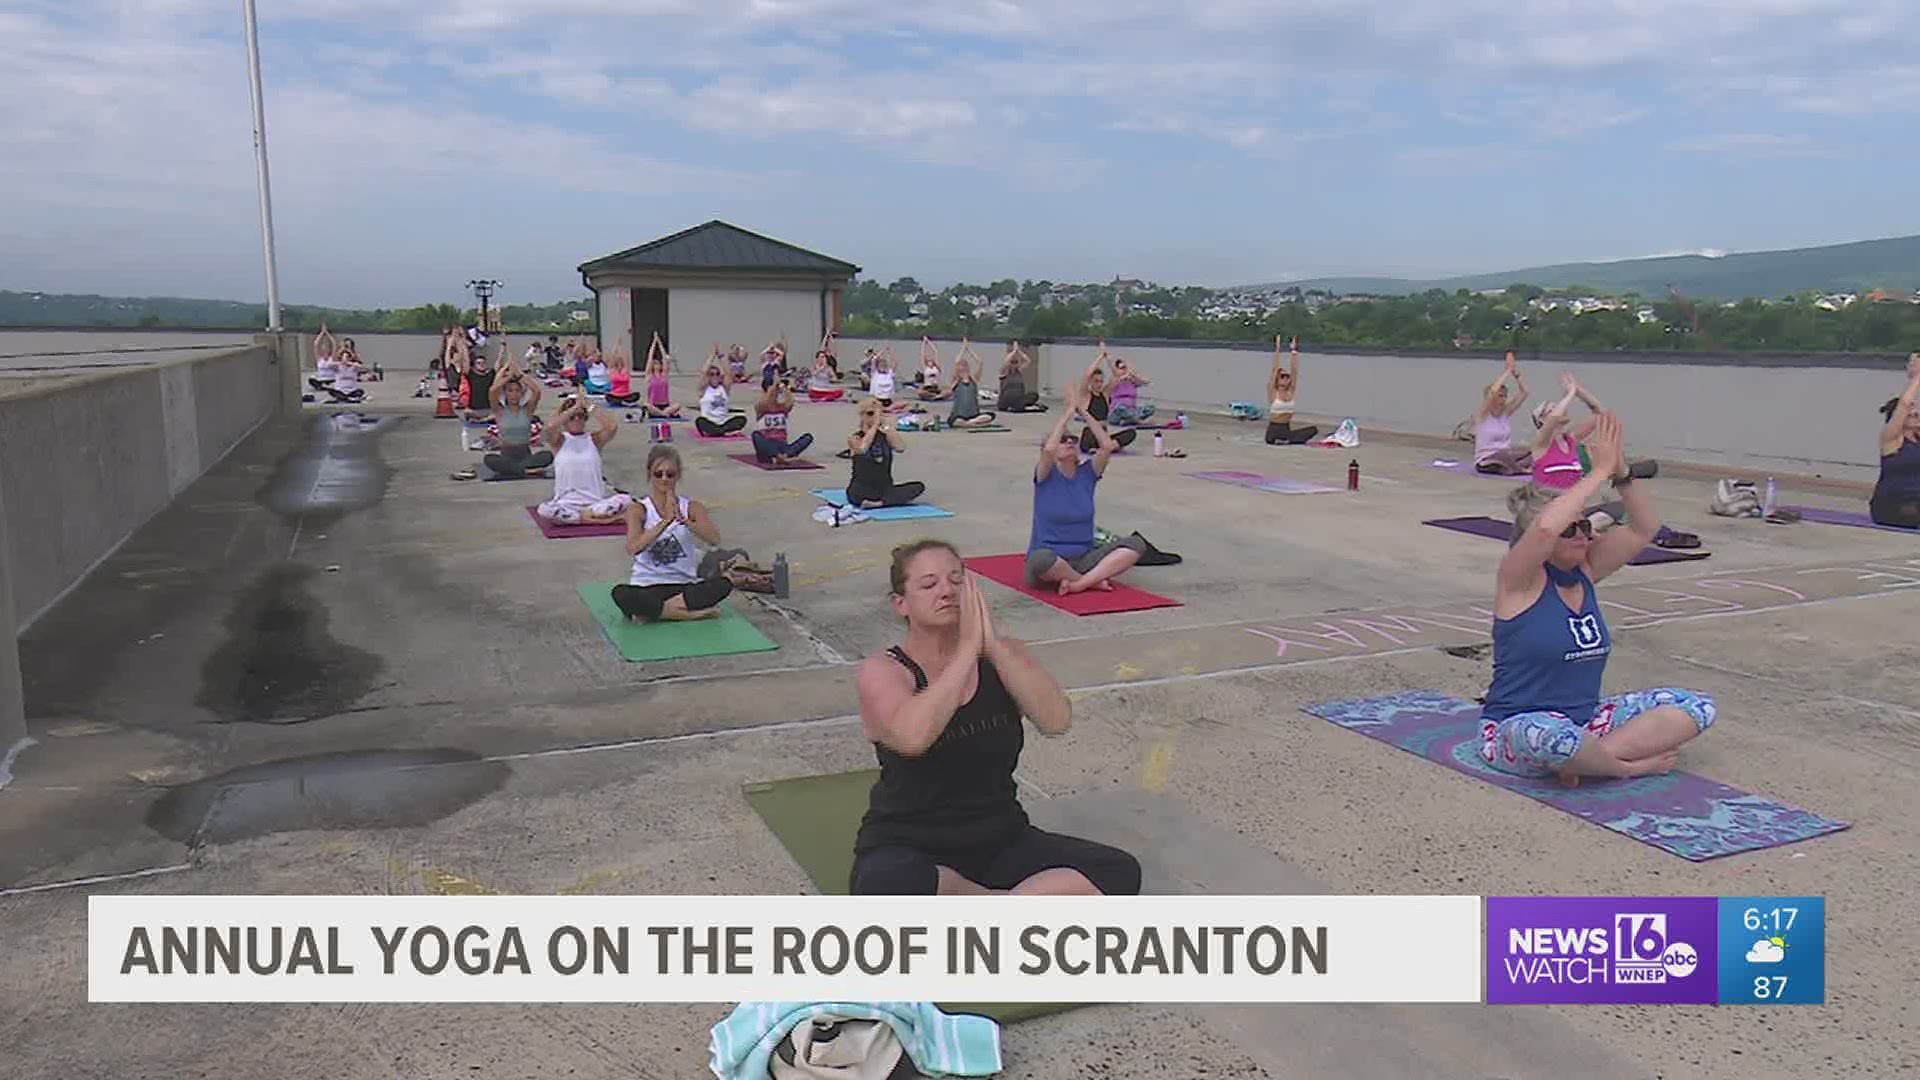 The Seventh Annual Yoga on the Roof was held Saturday morning at the Marketplace at Steamtown.